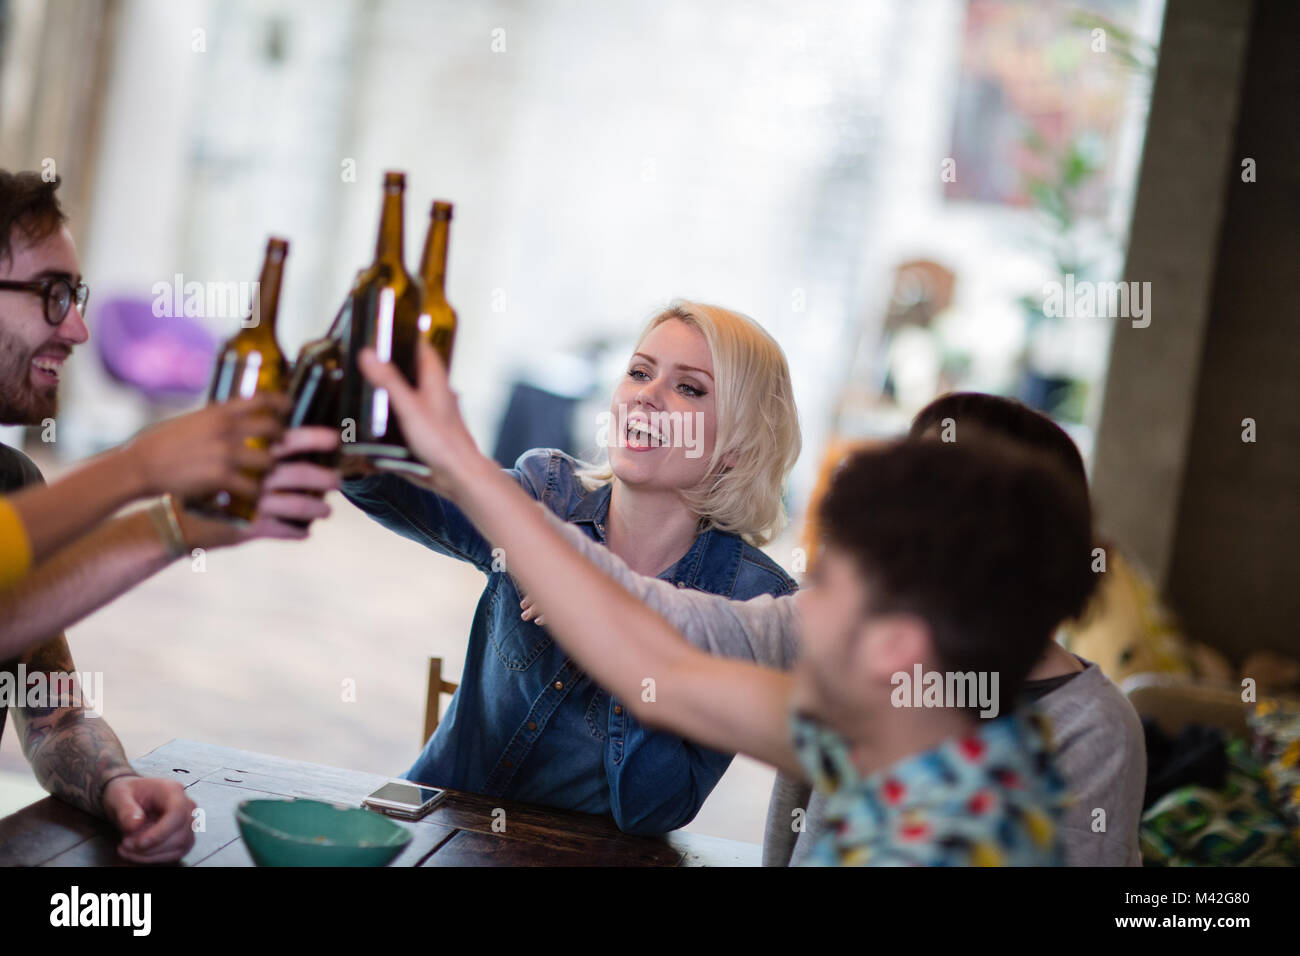 Group of friends clinking beer bottles at a house party Stock Photo